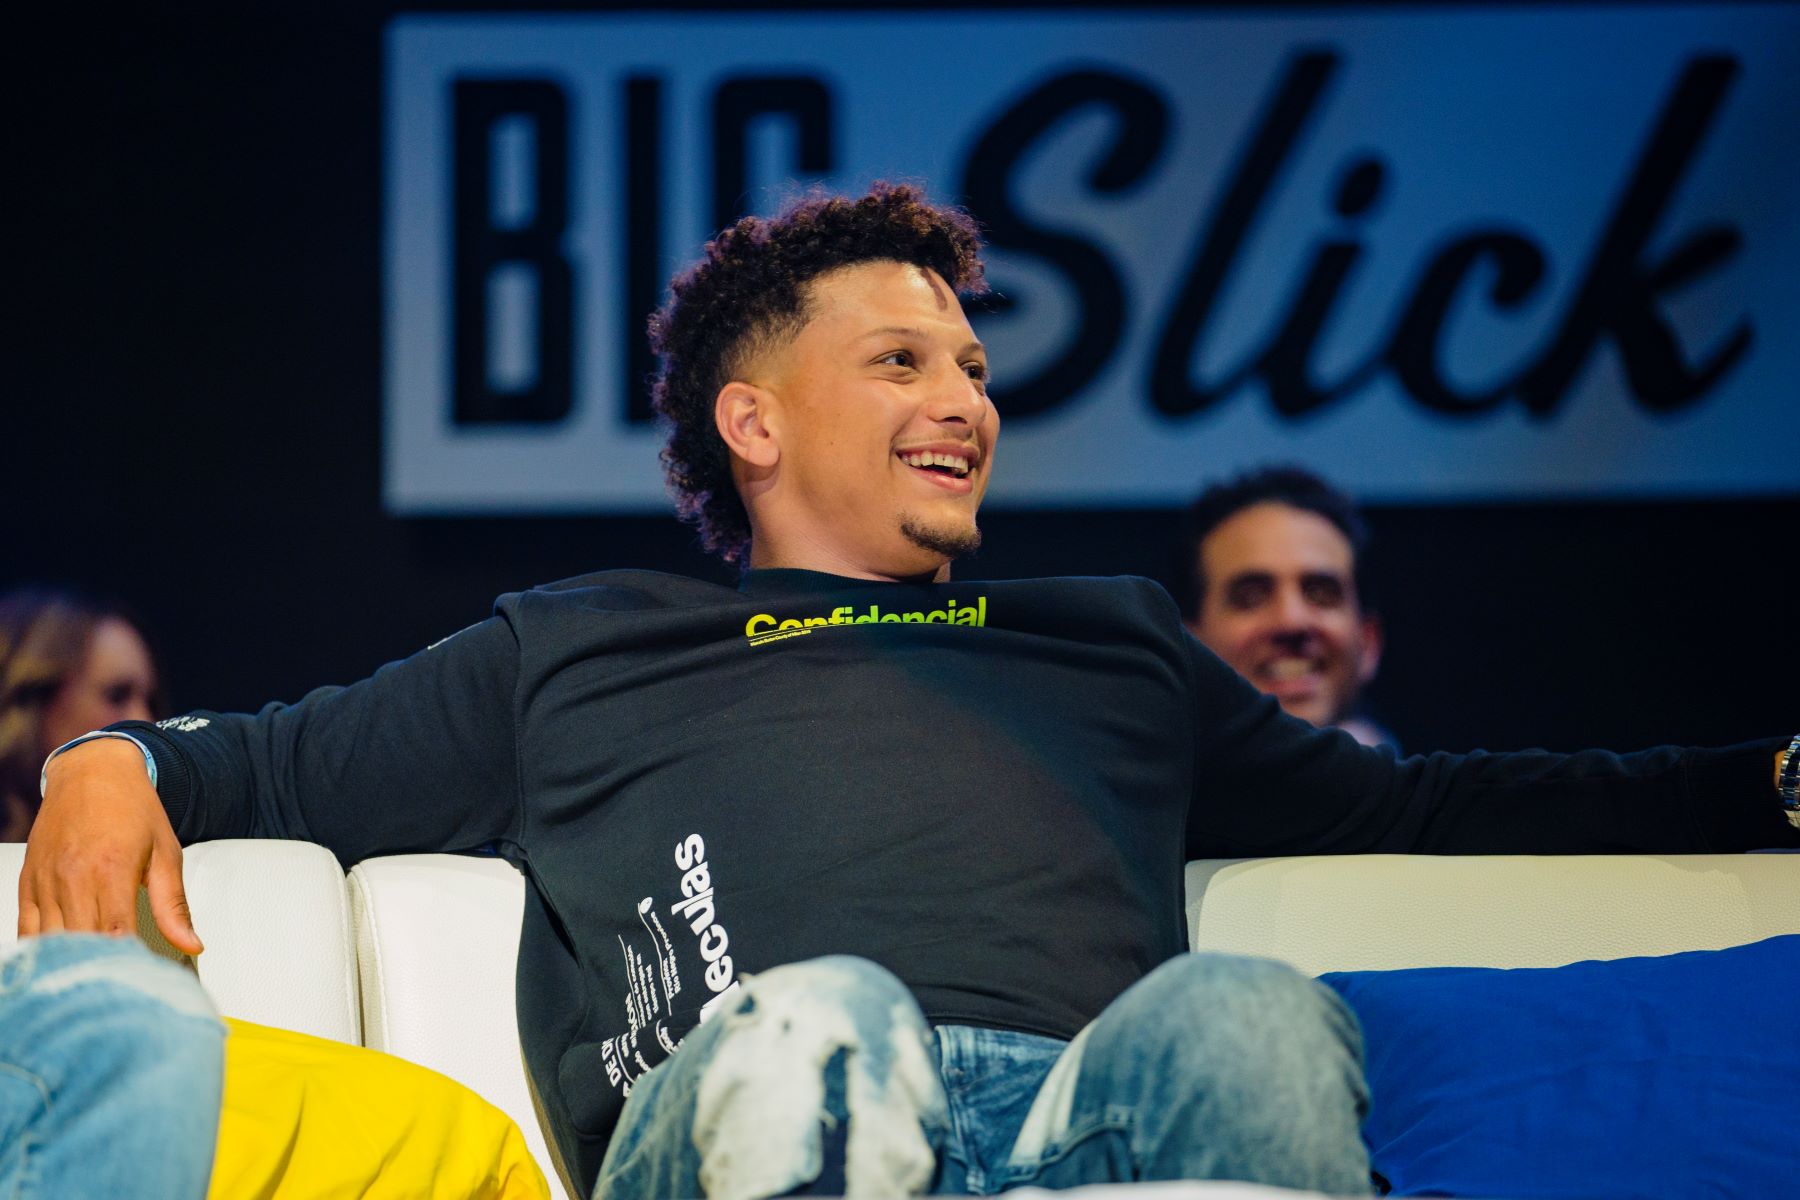 Patrick Mahomes at a celebrity auction for charity to the Children's Mercy Hospital of Kansas City, Missouri